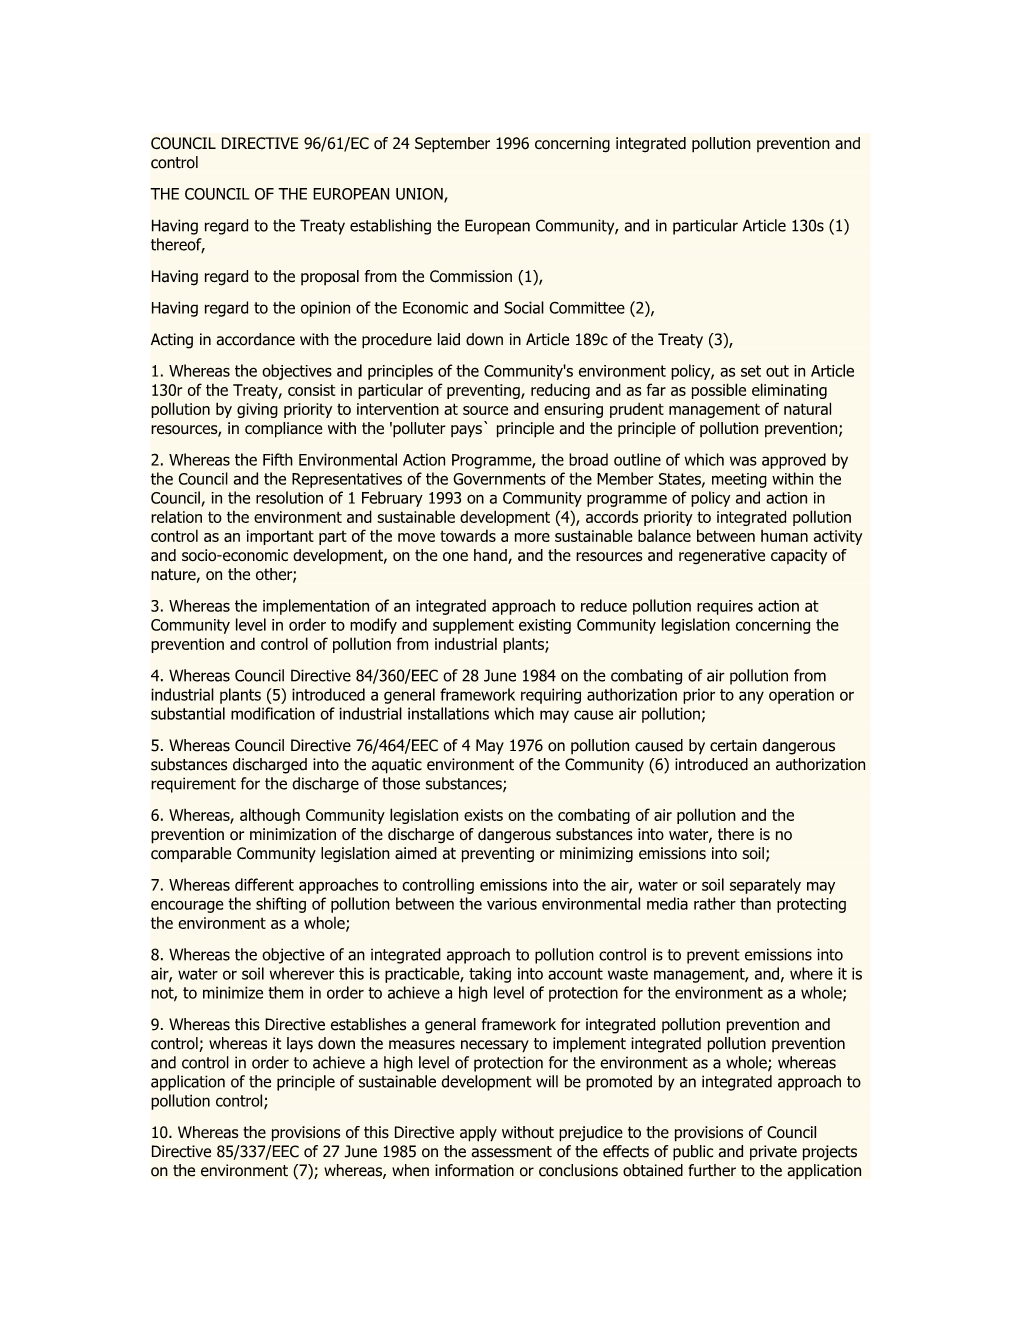 COUNCIL DIRECTIVE 96/61/EC of 24 September 1996 Concerning Integrated Pollution Prevention